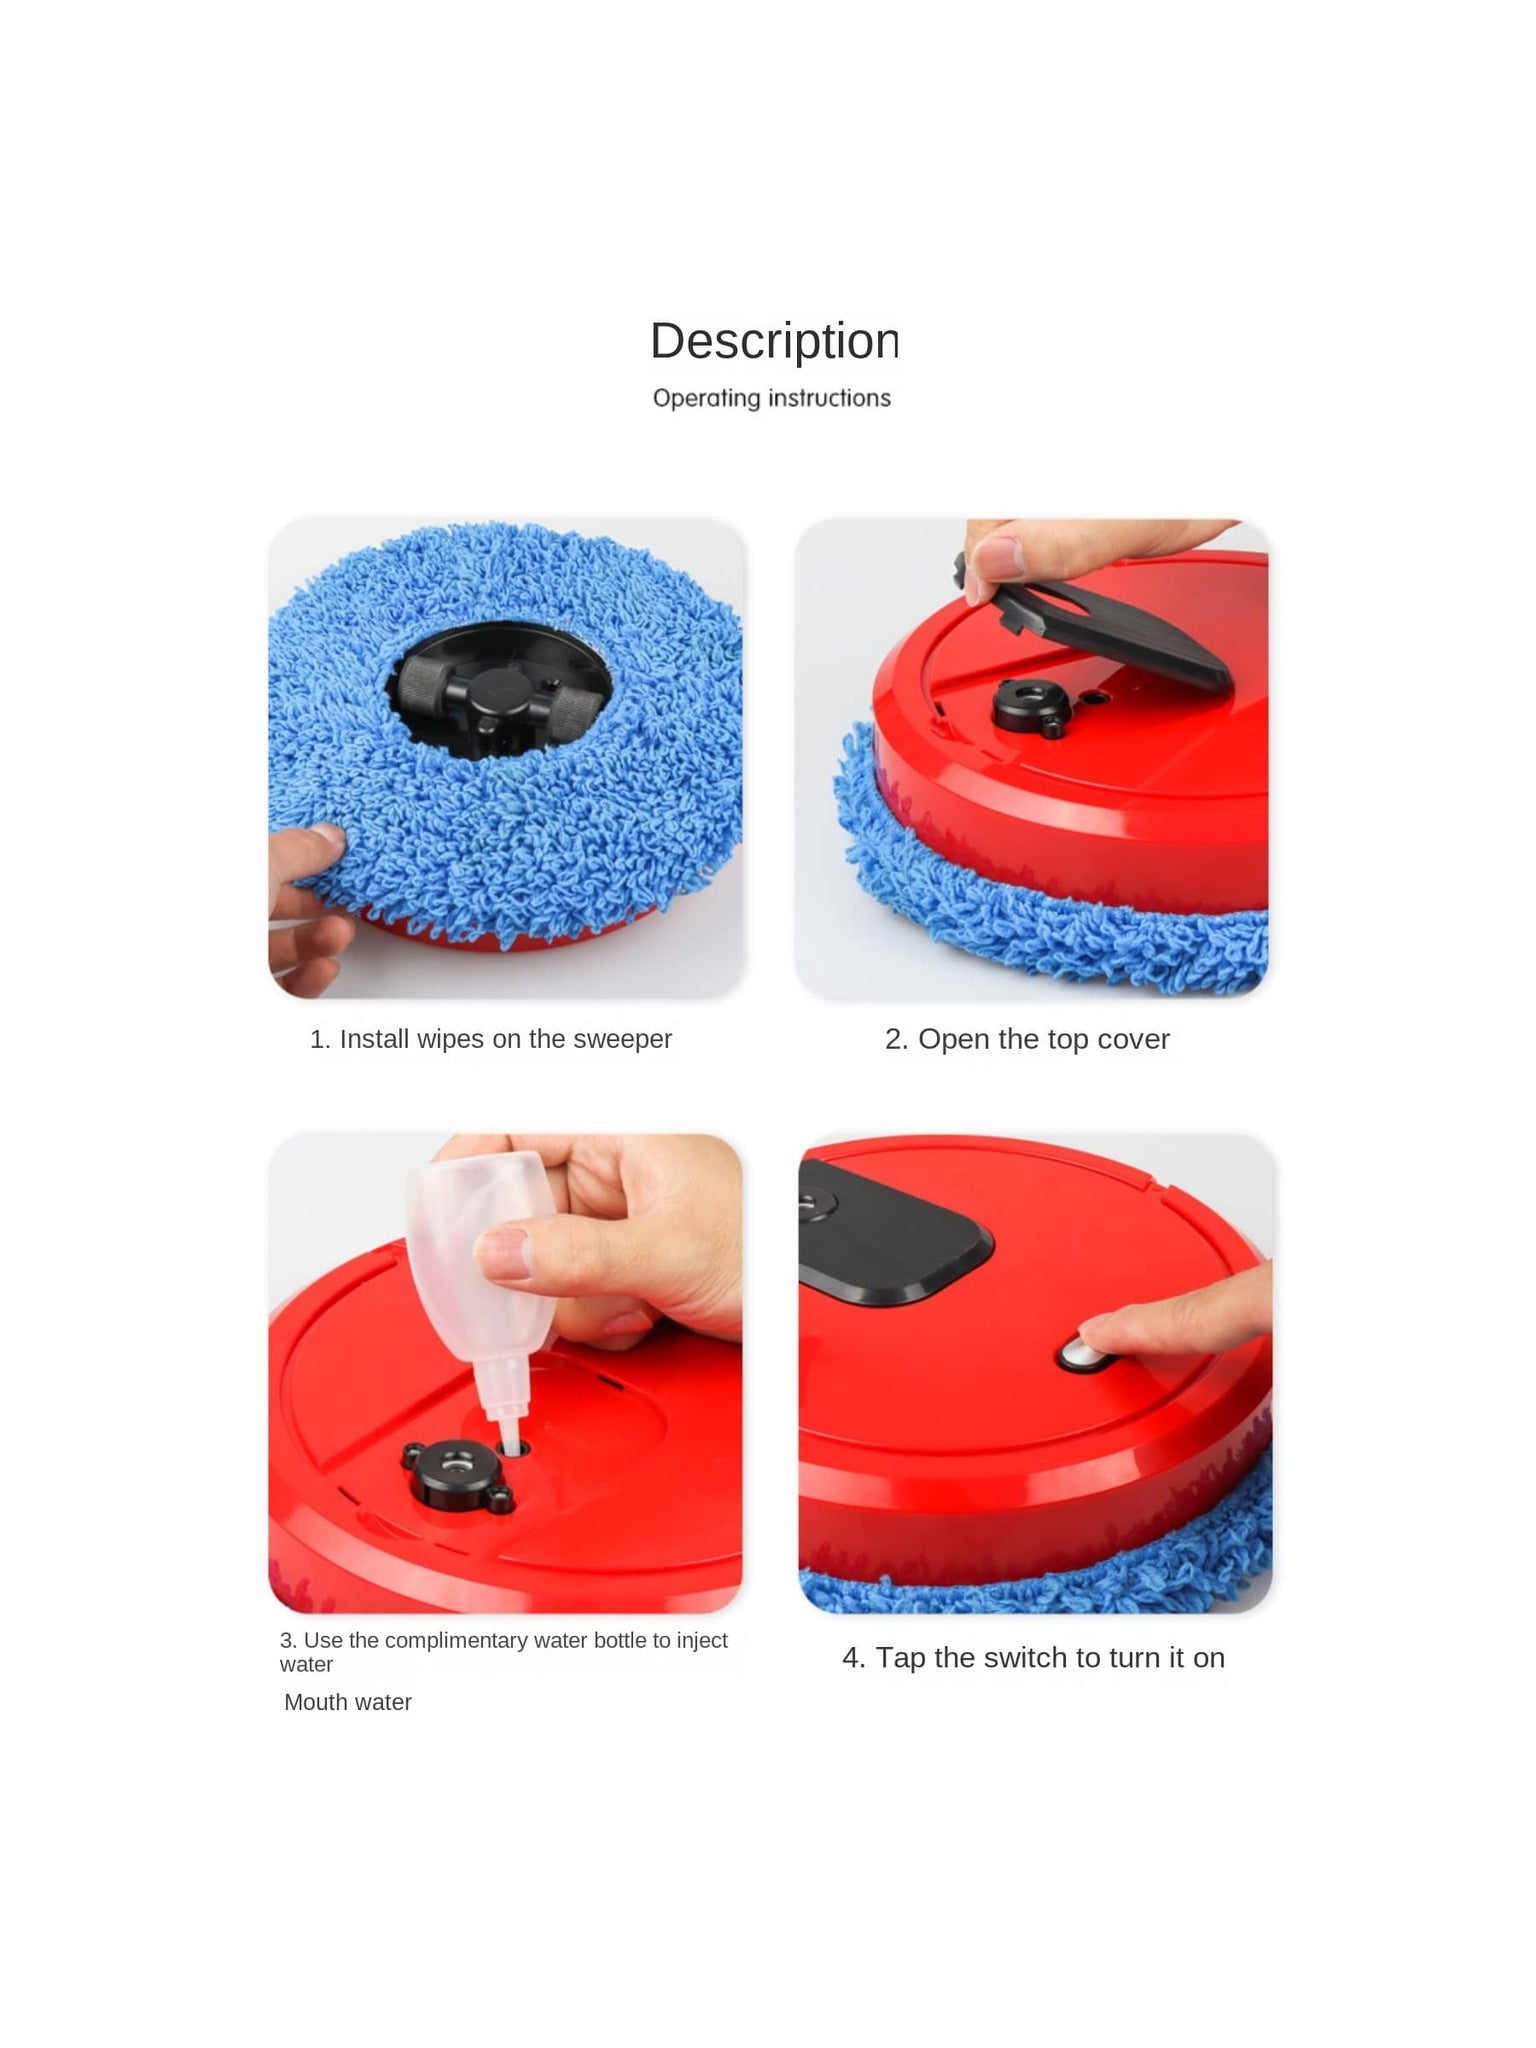 Household Portable Mopping Robot Humidifier Spray Wet and Dry Cleaning Mopping Robot Floor Mopping Robot Machine-Black-10